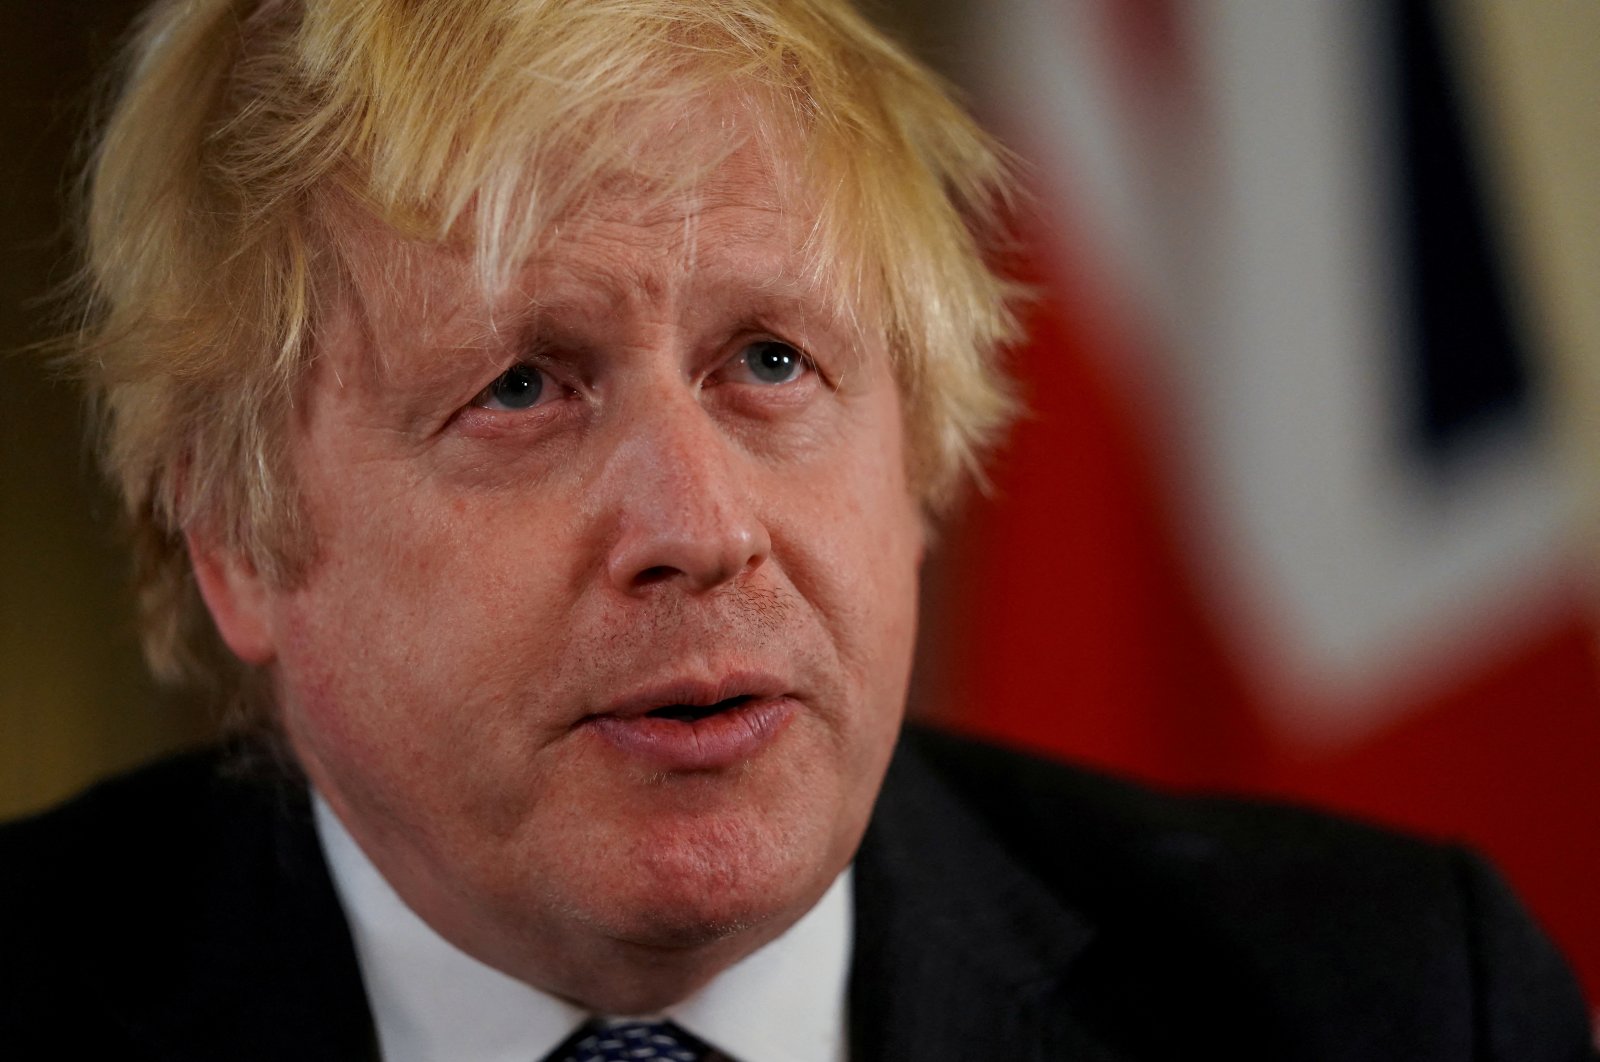 British Prime Minister Boris Johnson records an address to the nation, to provide an update on the booster vaccine COVID-19 program at Downing Street, London, Britain, Dec. 12, 2021. (Reuters File Photo)